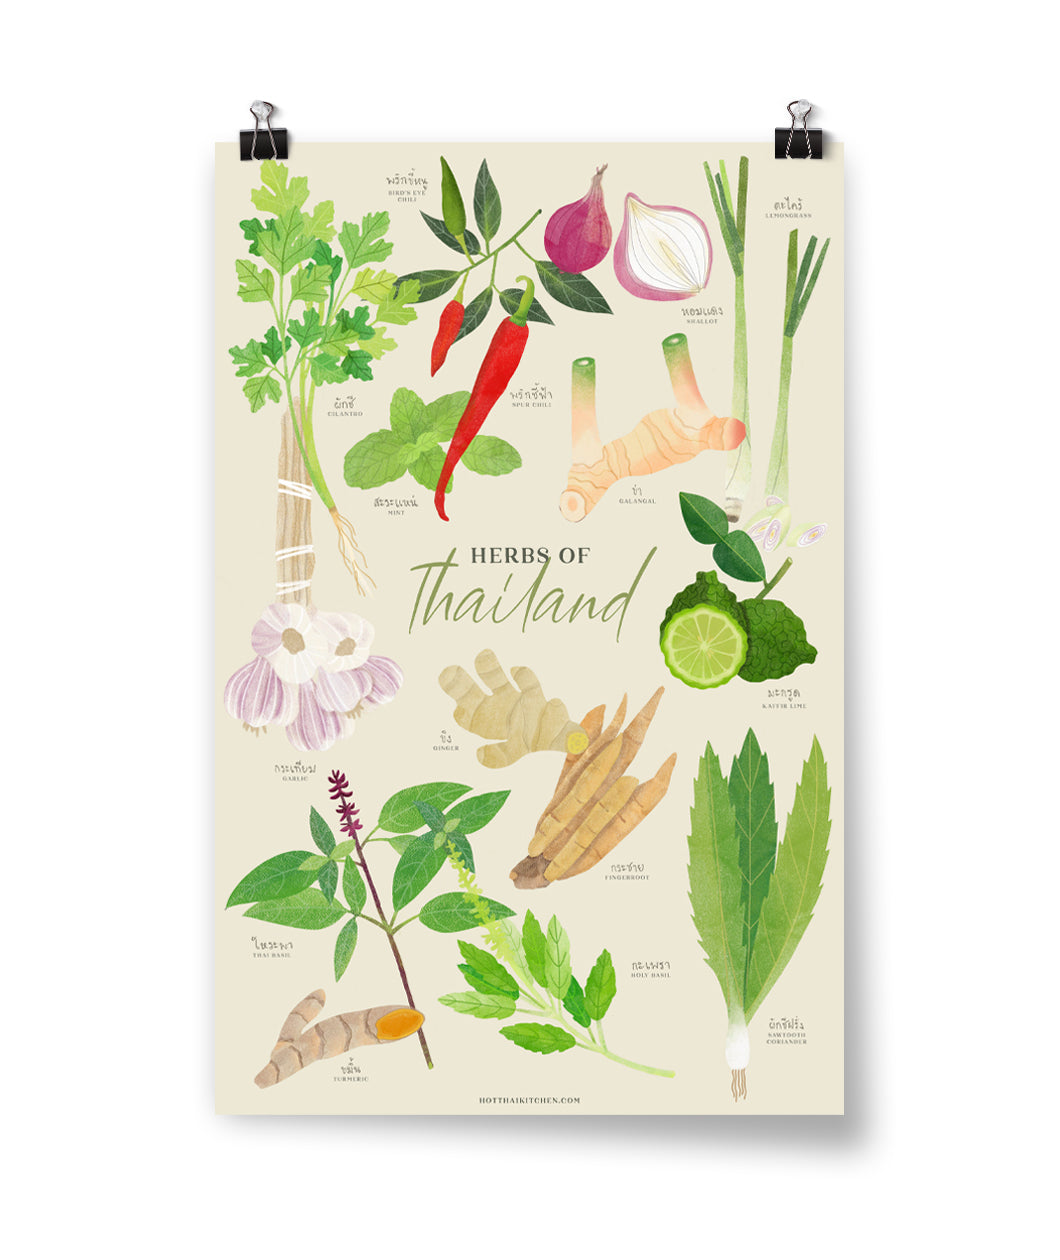 A poster from Hot Thai Kitchen showing colorful illustrations of different herbs of Thailand.